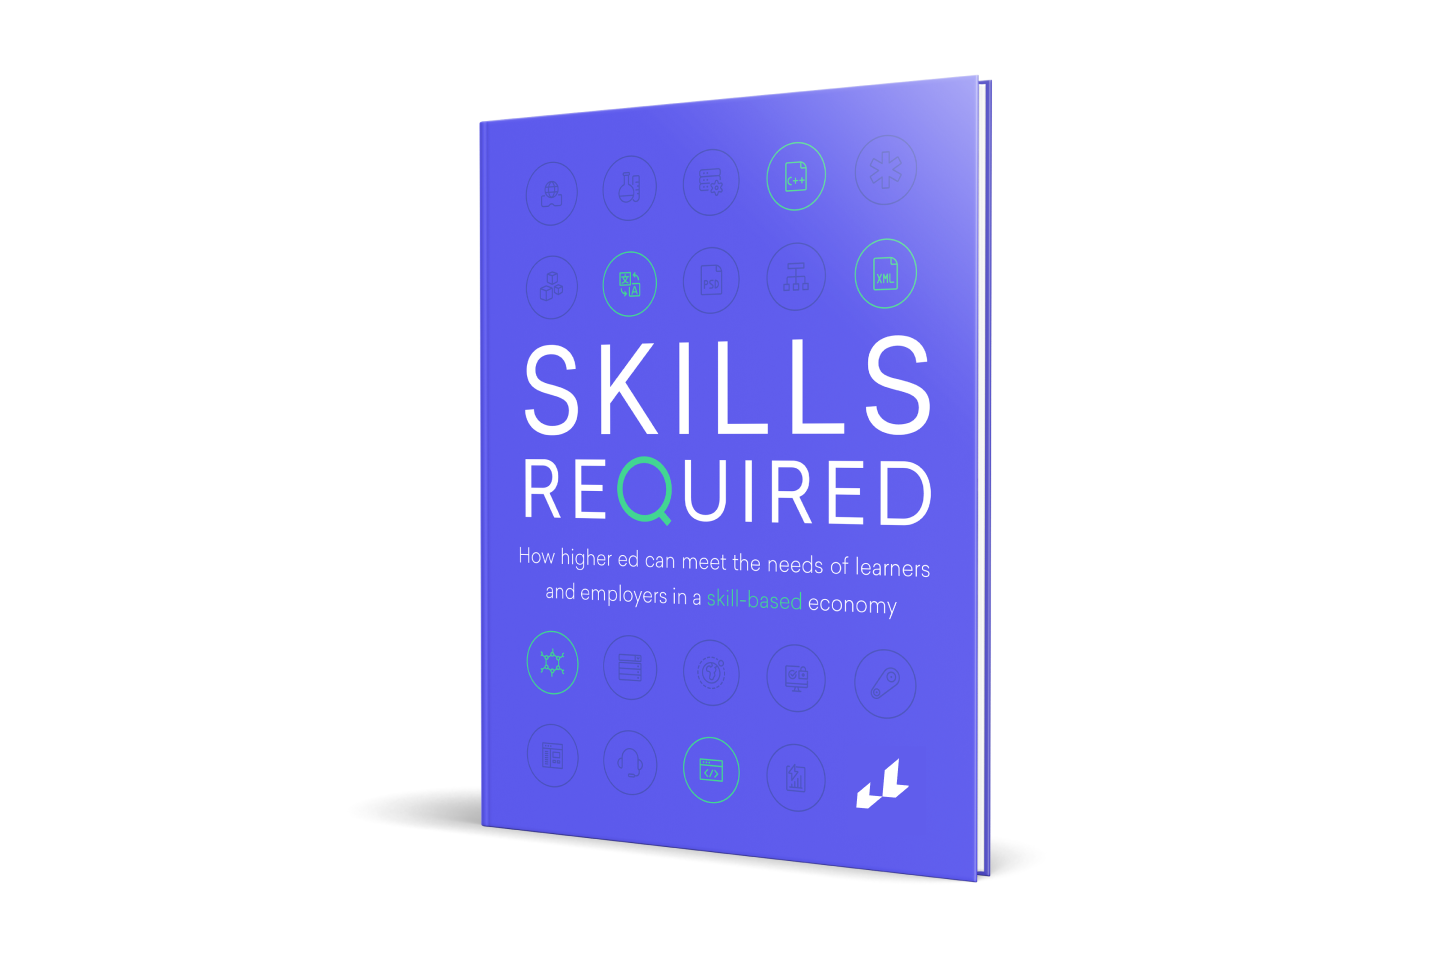 Skills Required ebook cover updated Lightcast logo